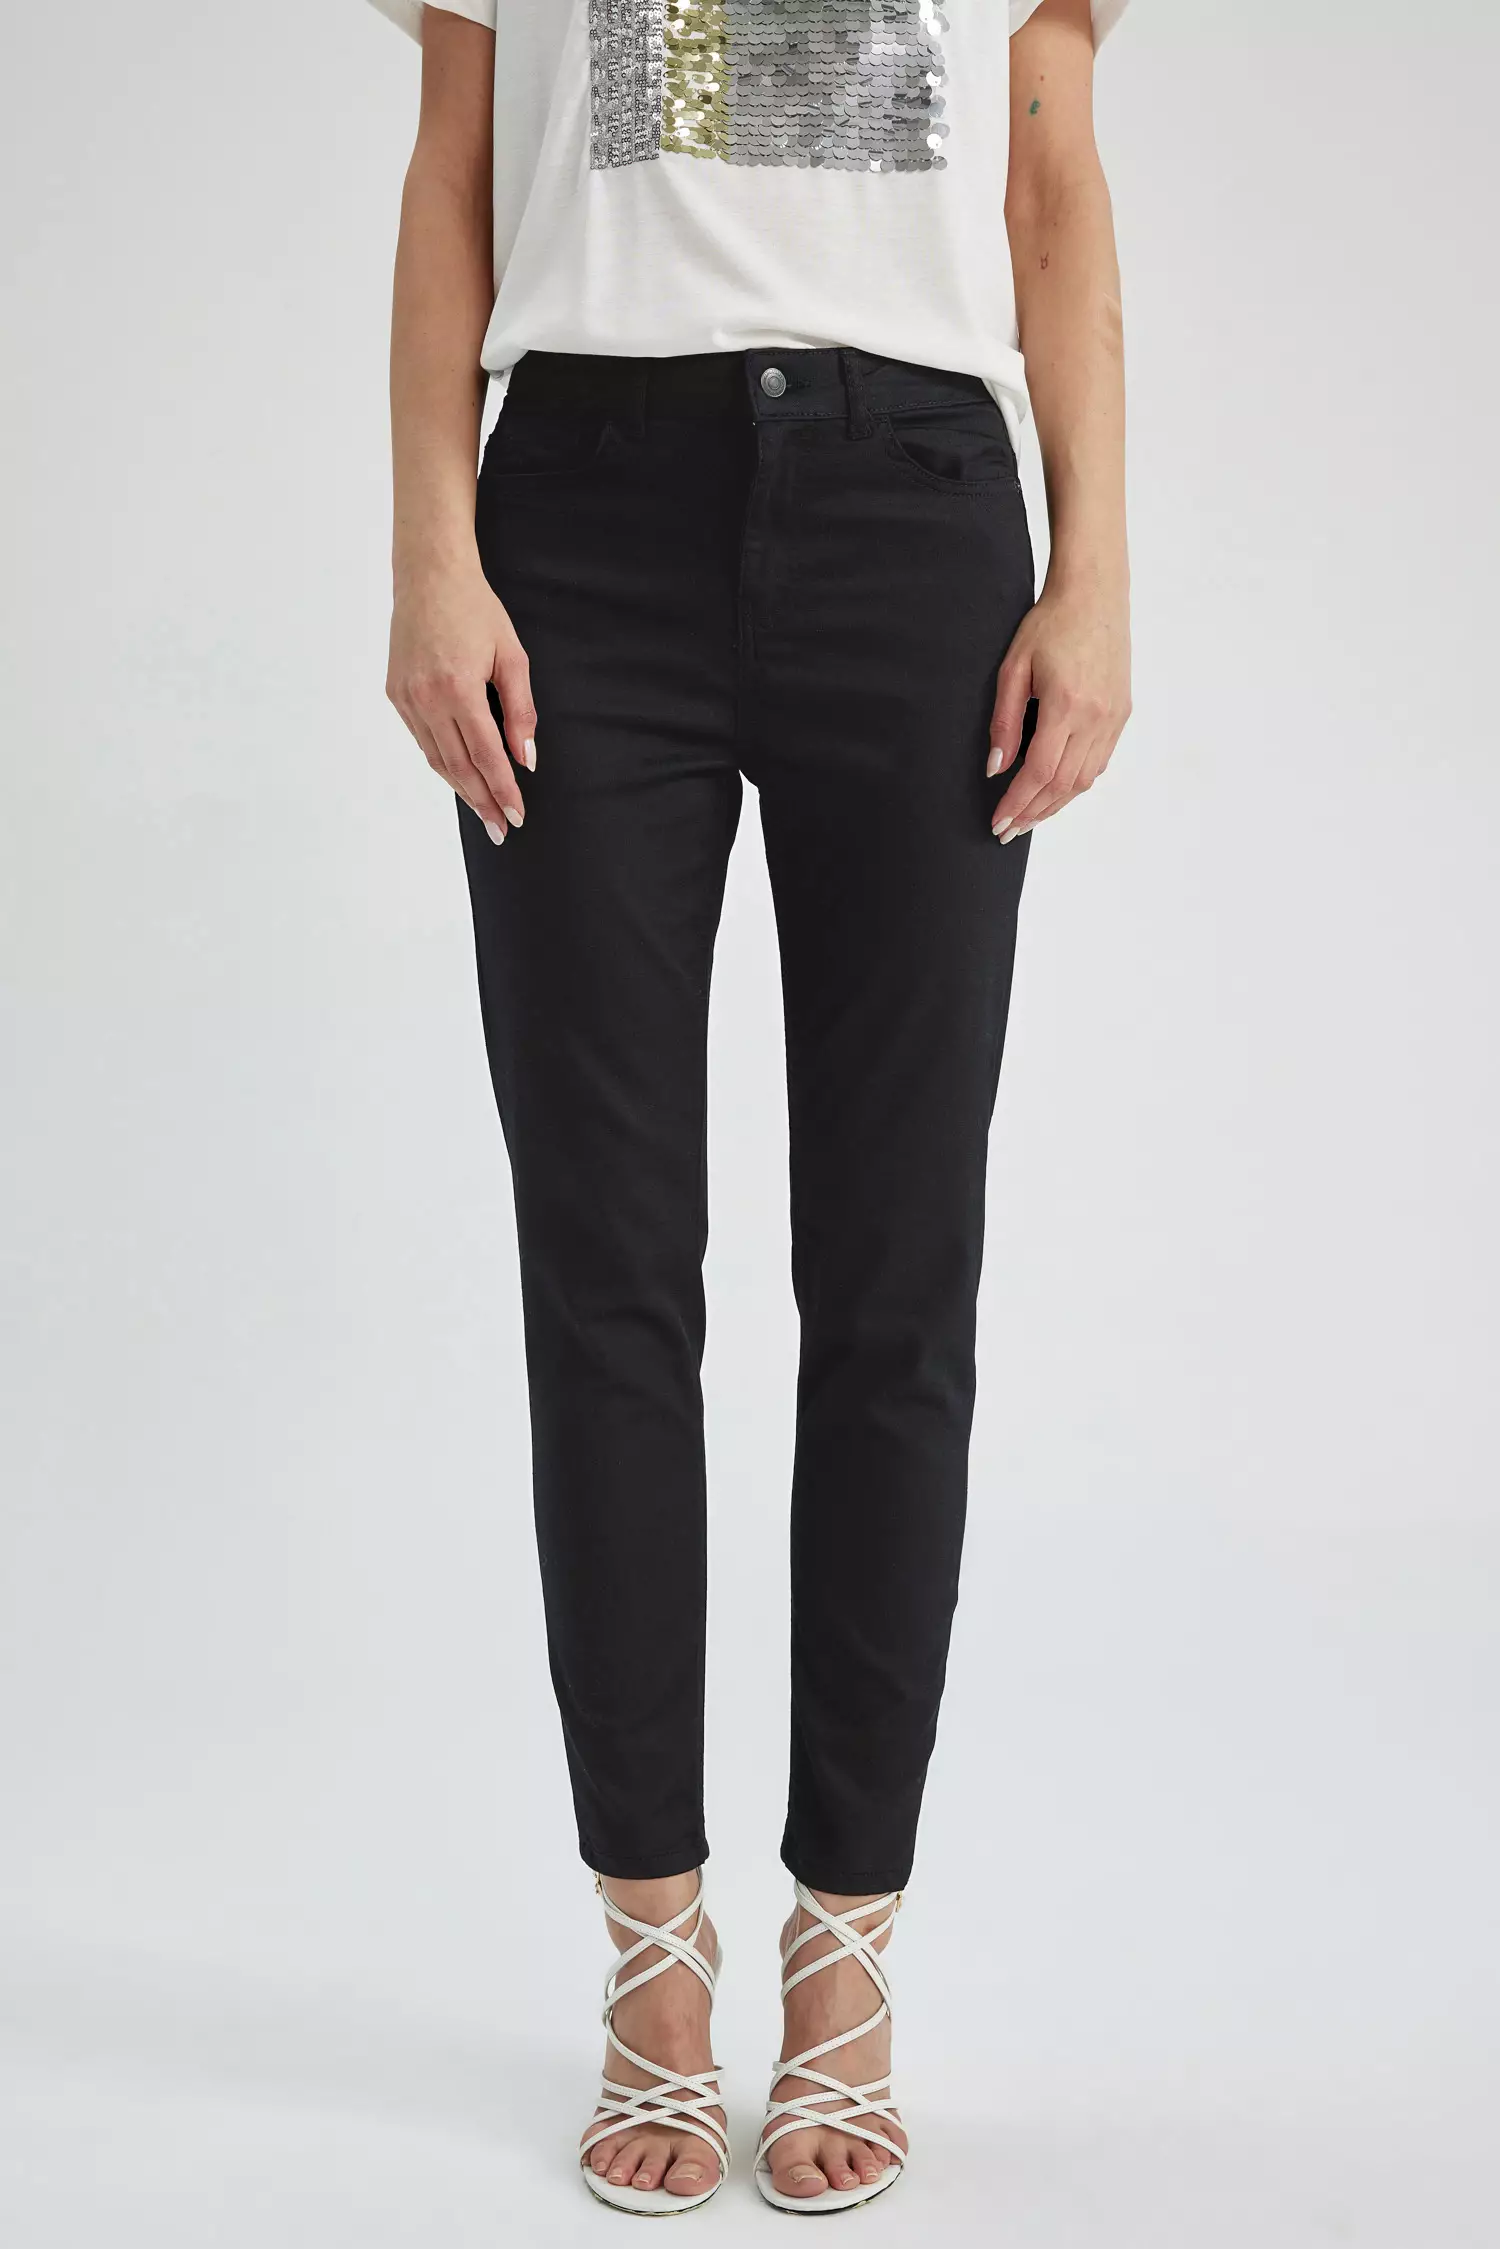 Slimfit Trouser pants high waisted